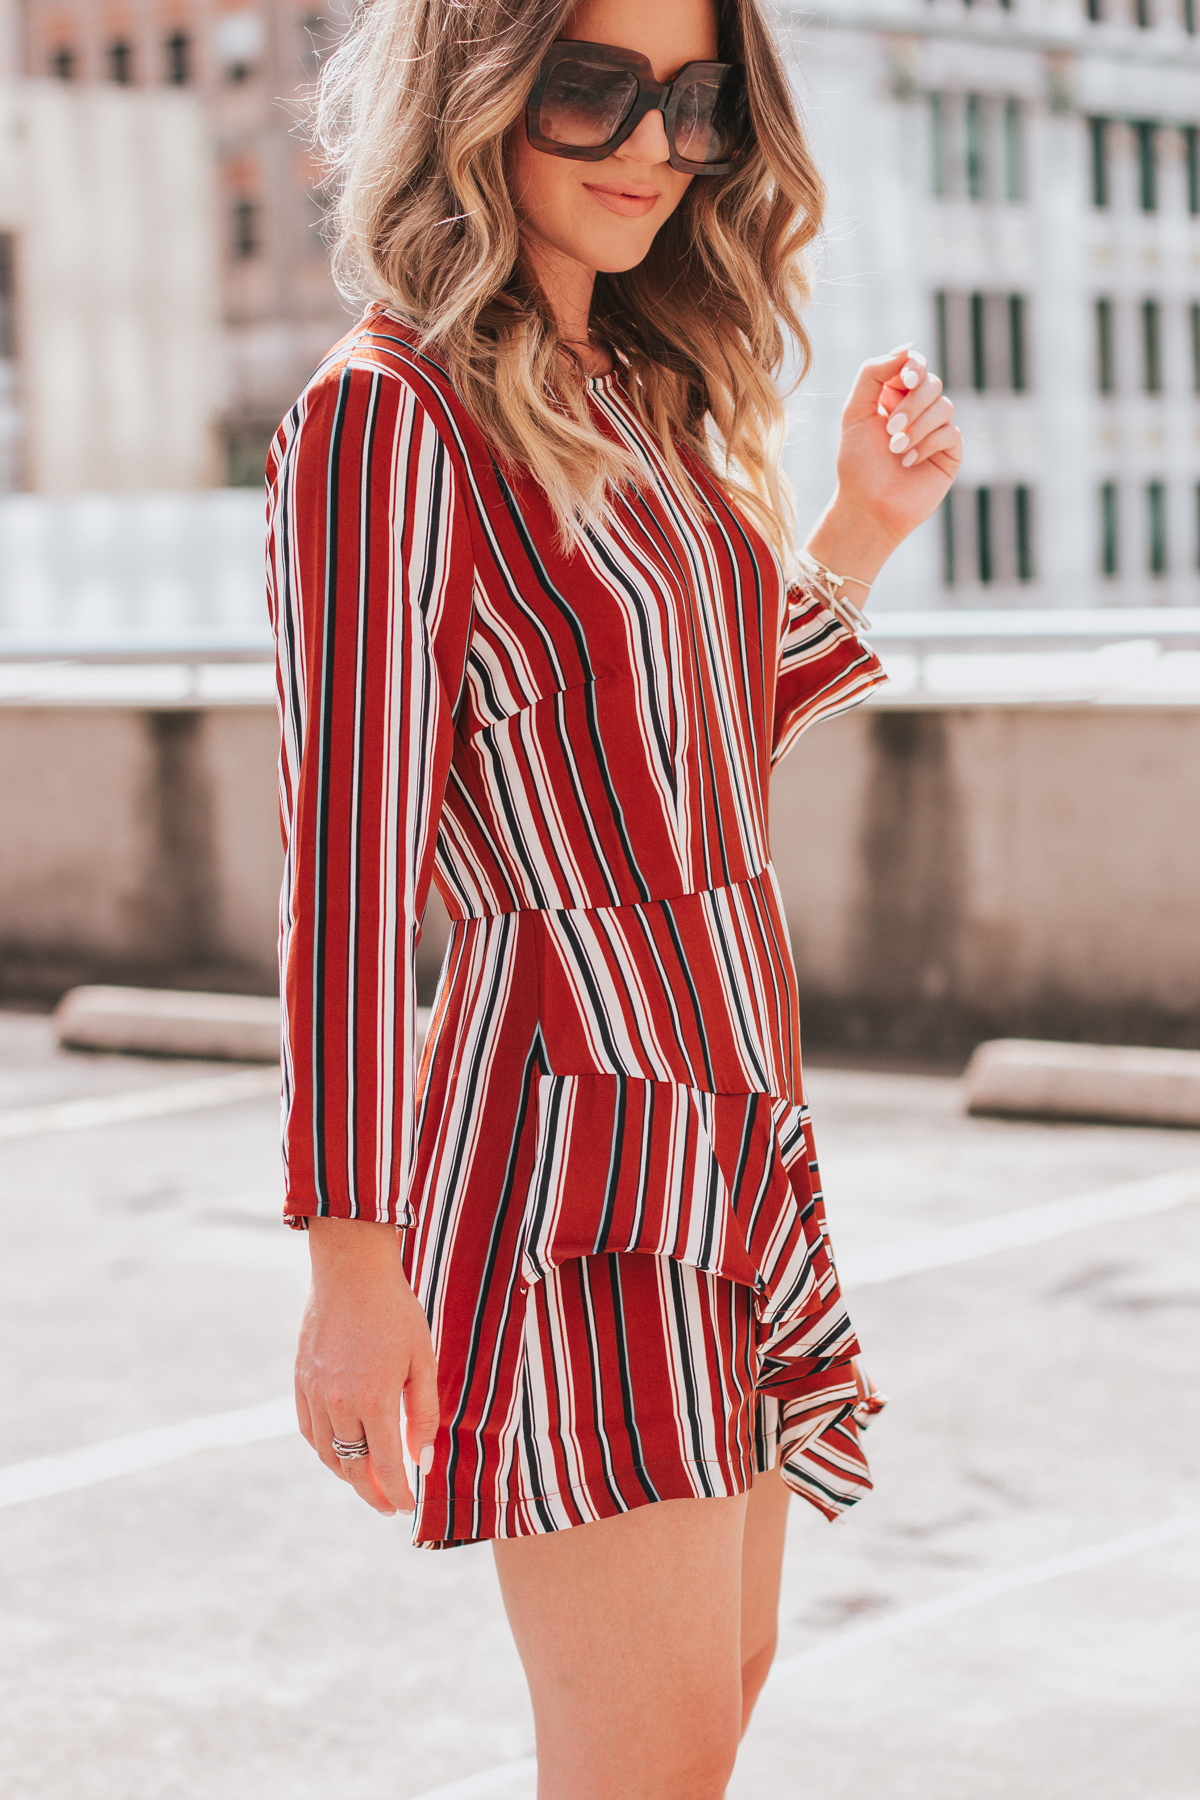 Double Shot of Sass | Fall Romper From Saltflat